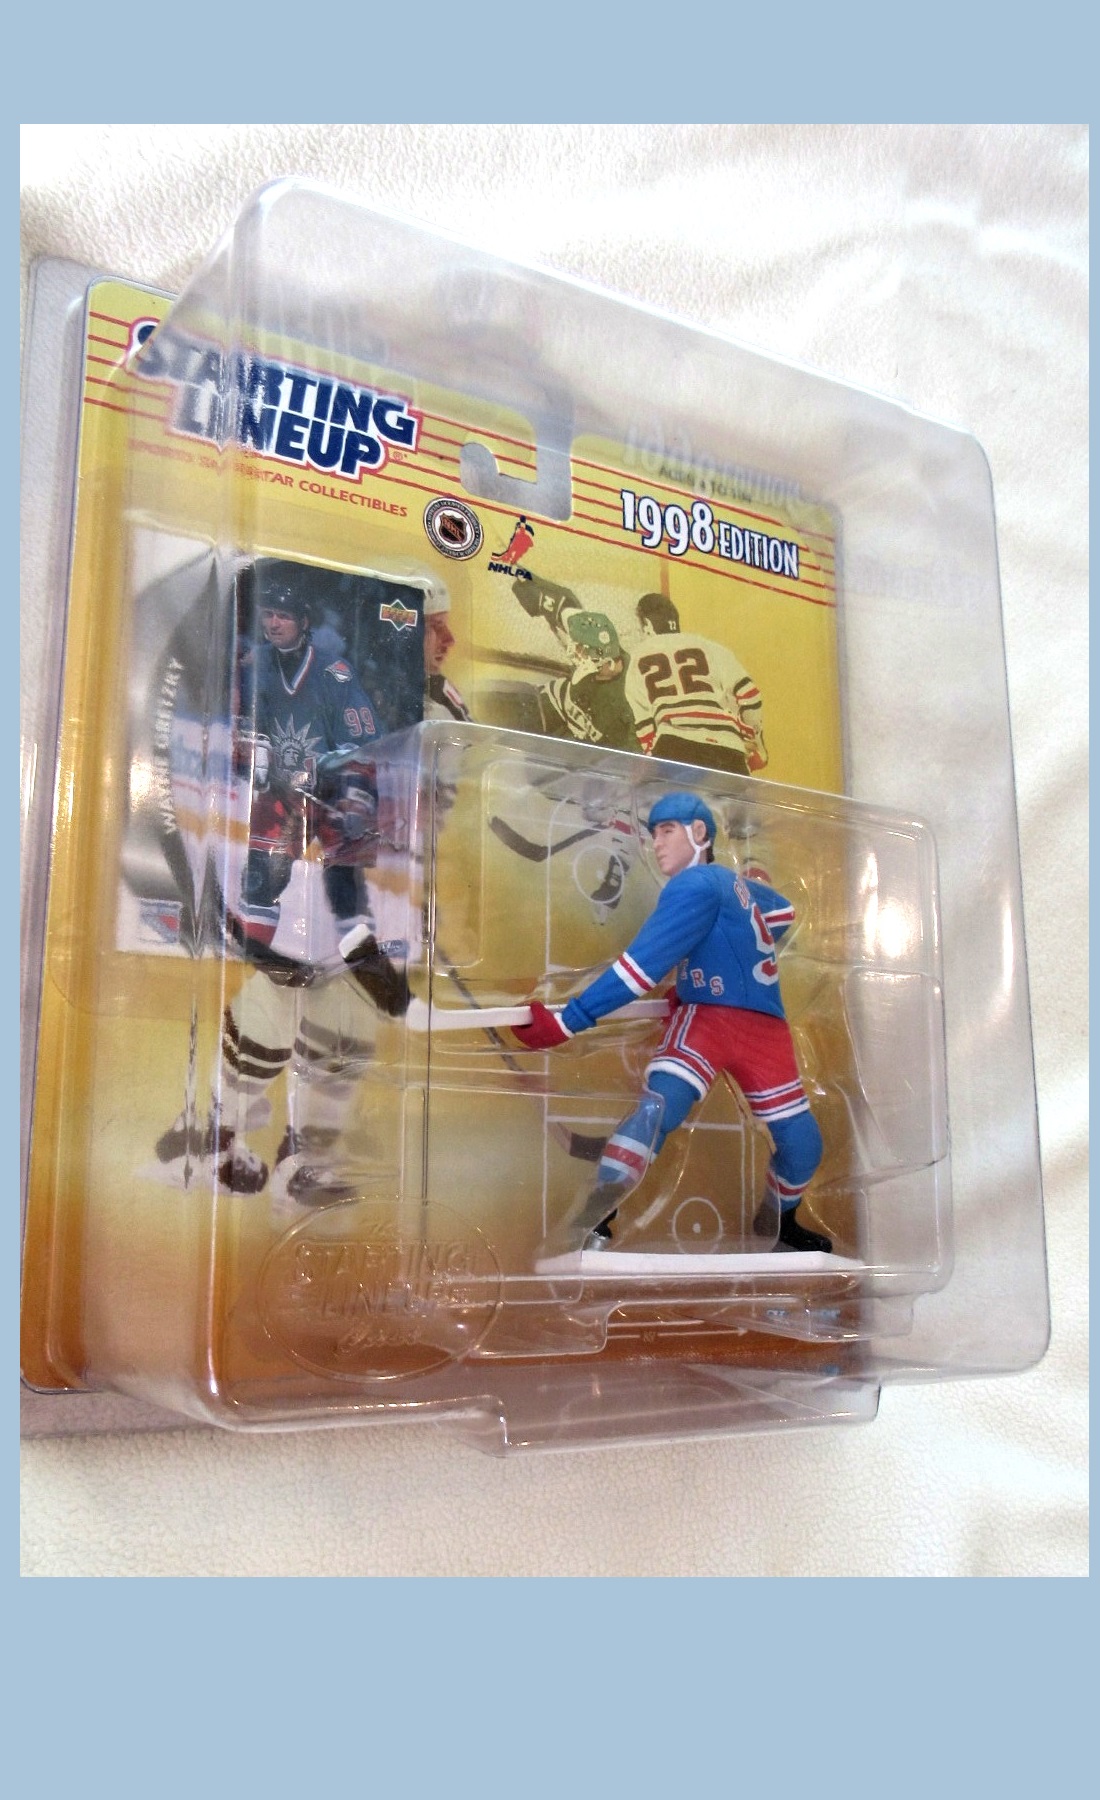 NHL Ice Hockey Star for Collectors